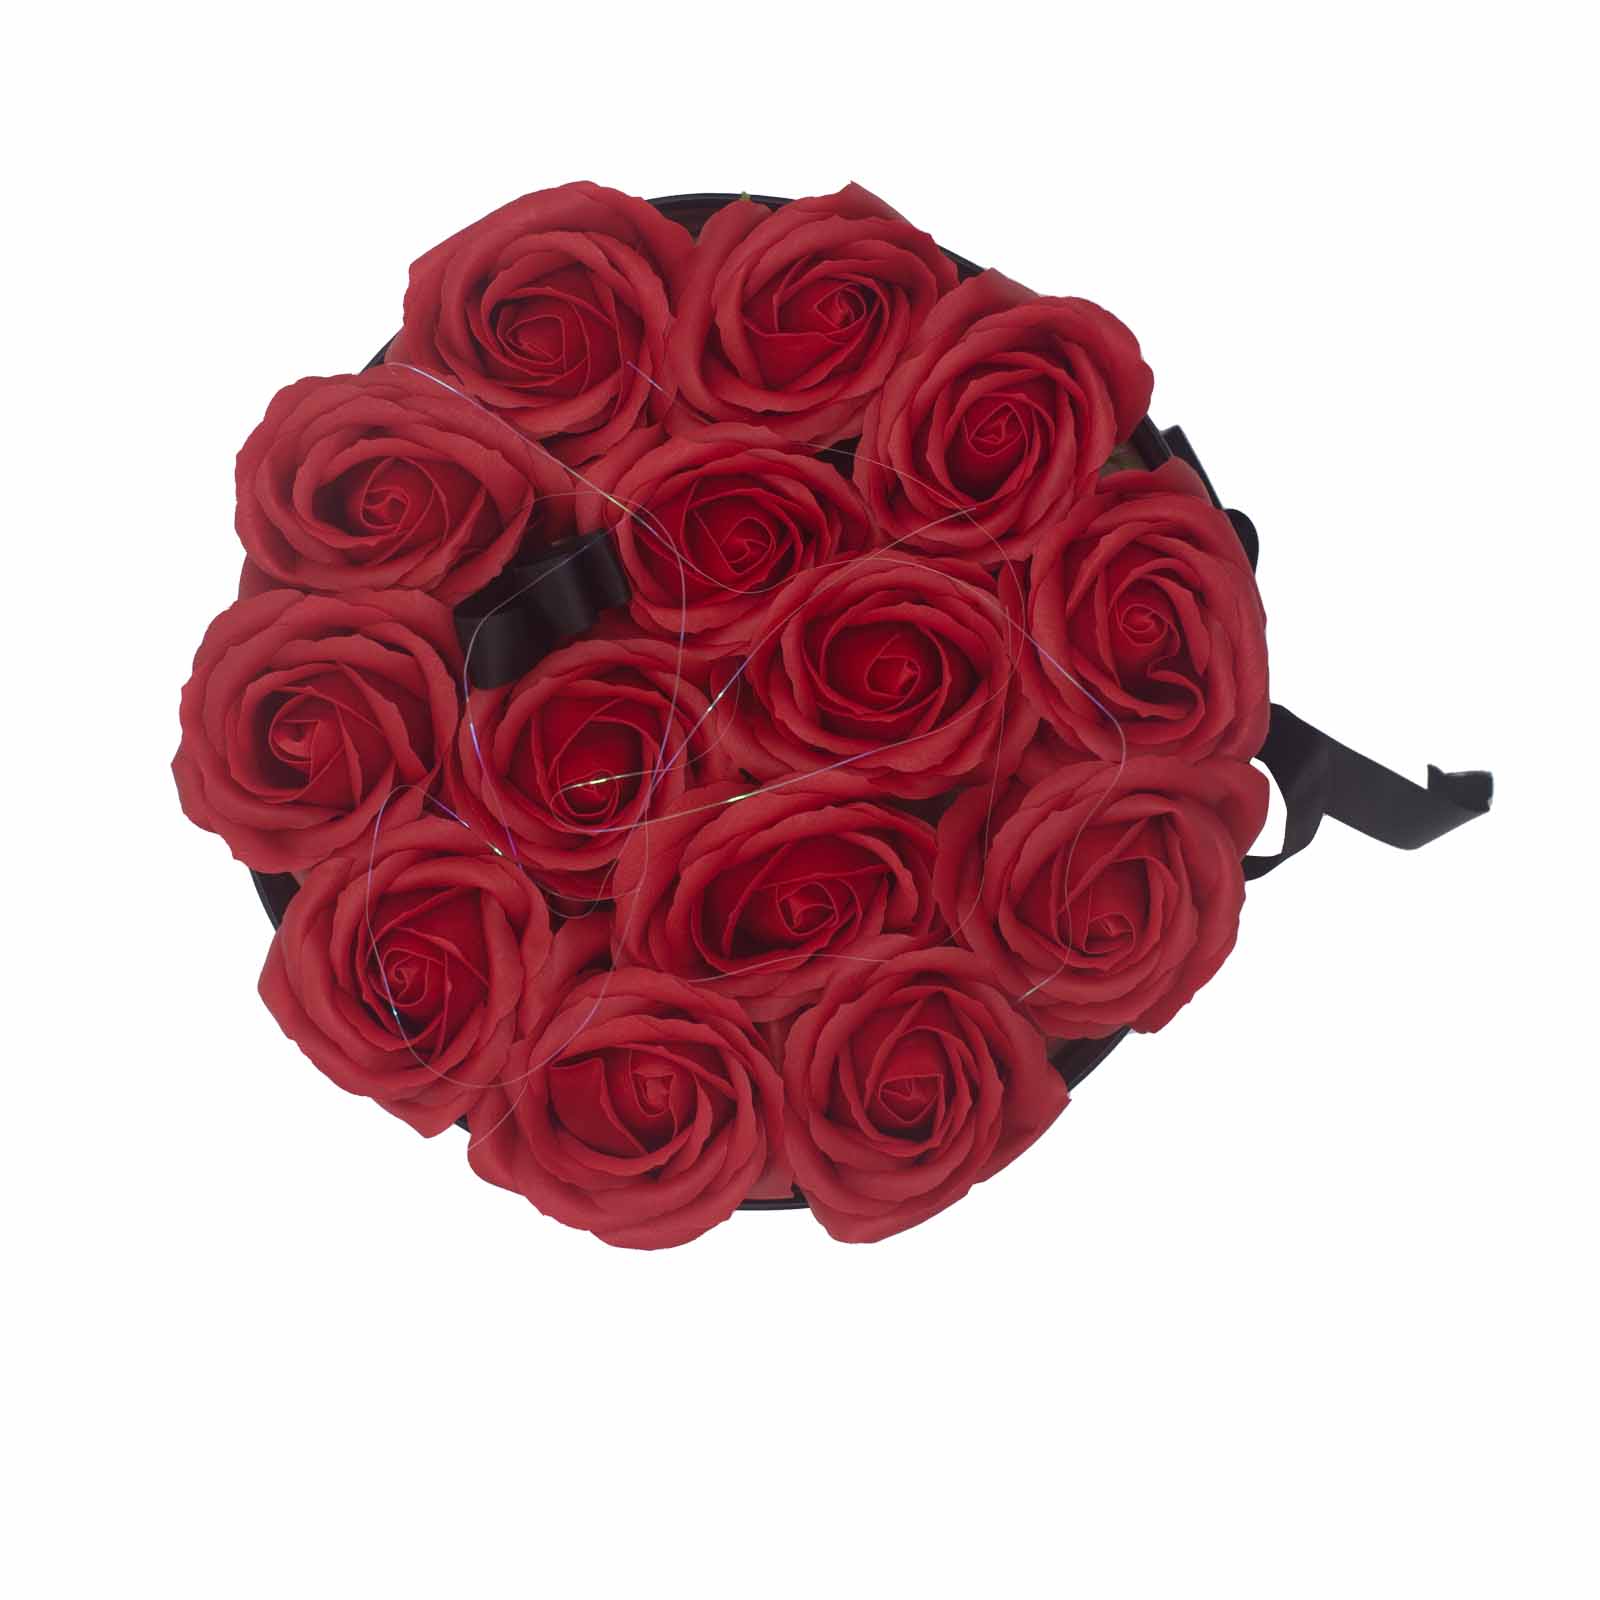 Soap Flower Gift Bouquet - 14 Red Roses - Round - best price from Maltashopper.com GSFB-03